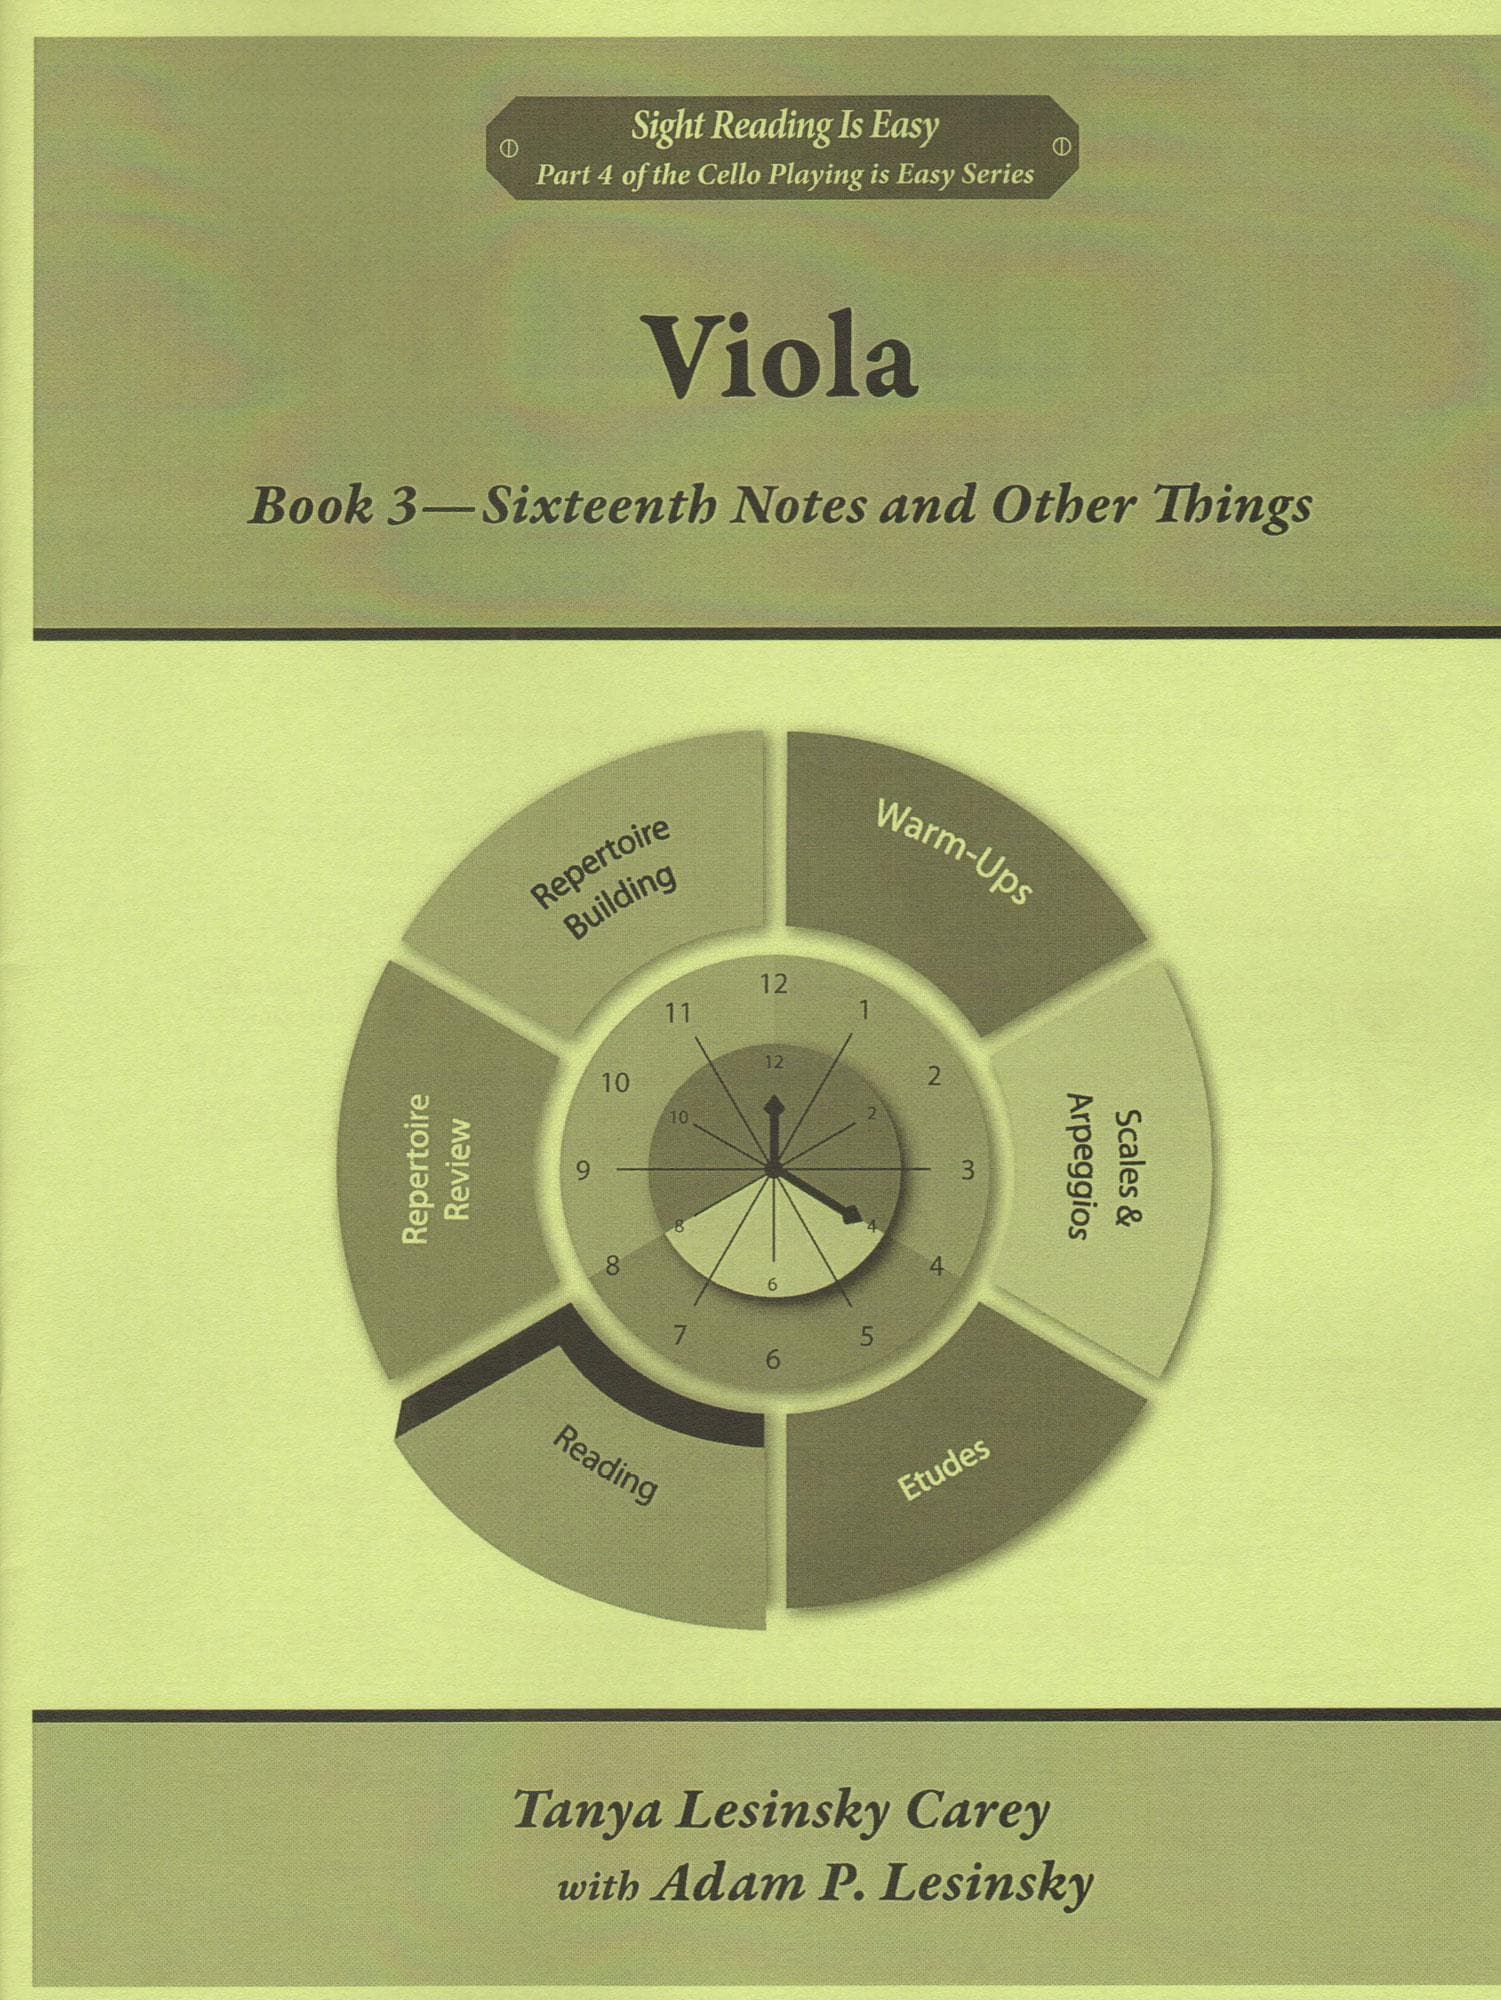 Sight Reading is Easy - for Viola - by Tanya Lesinsky Carey and Adam P. Lesinsky